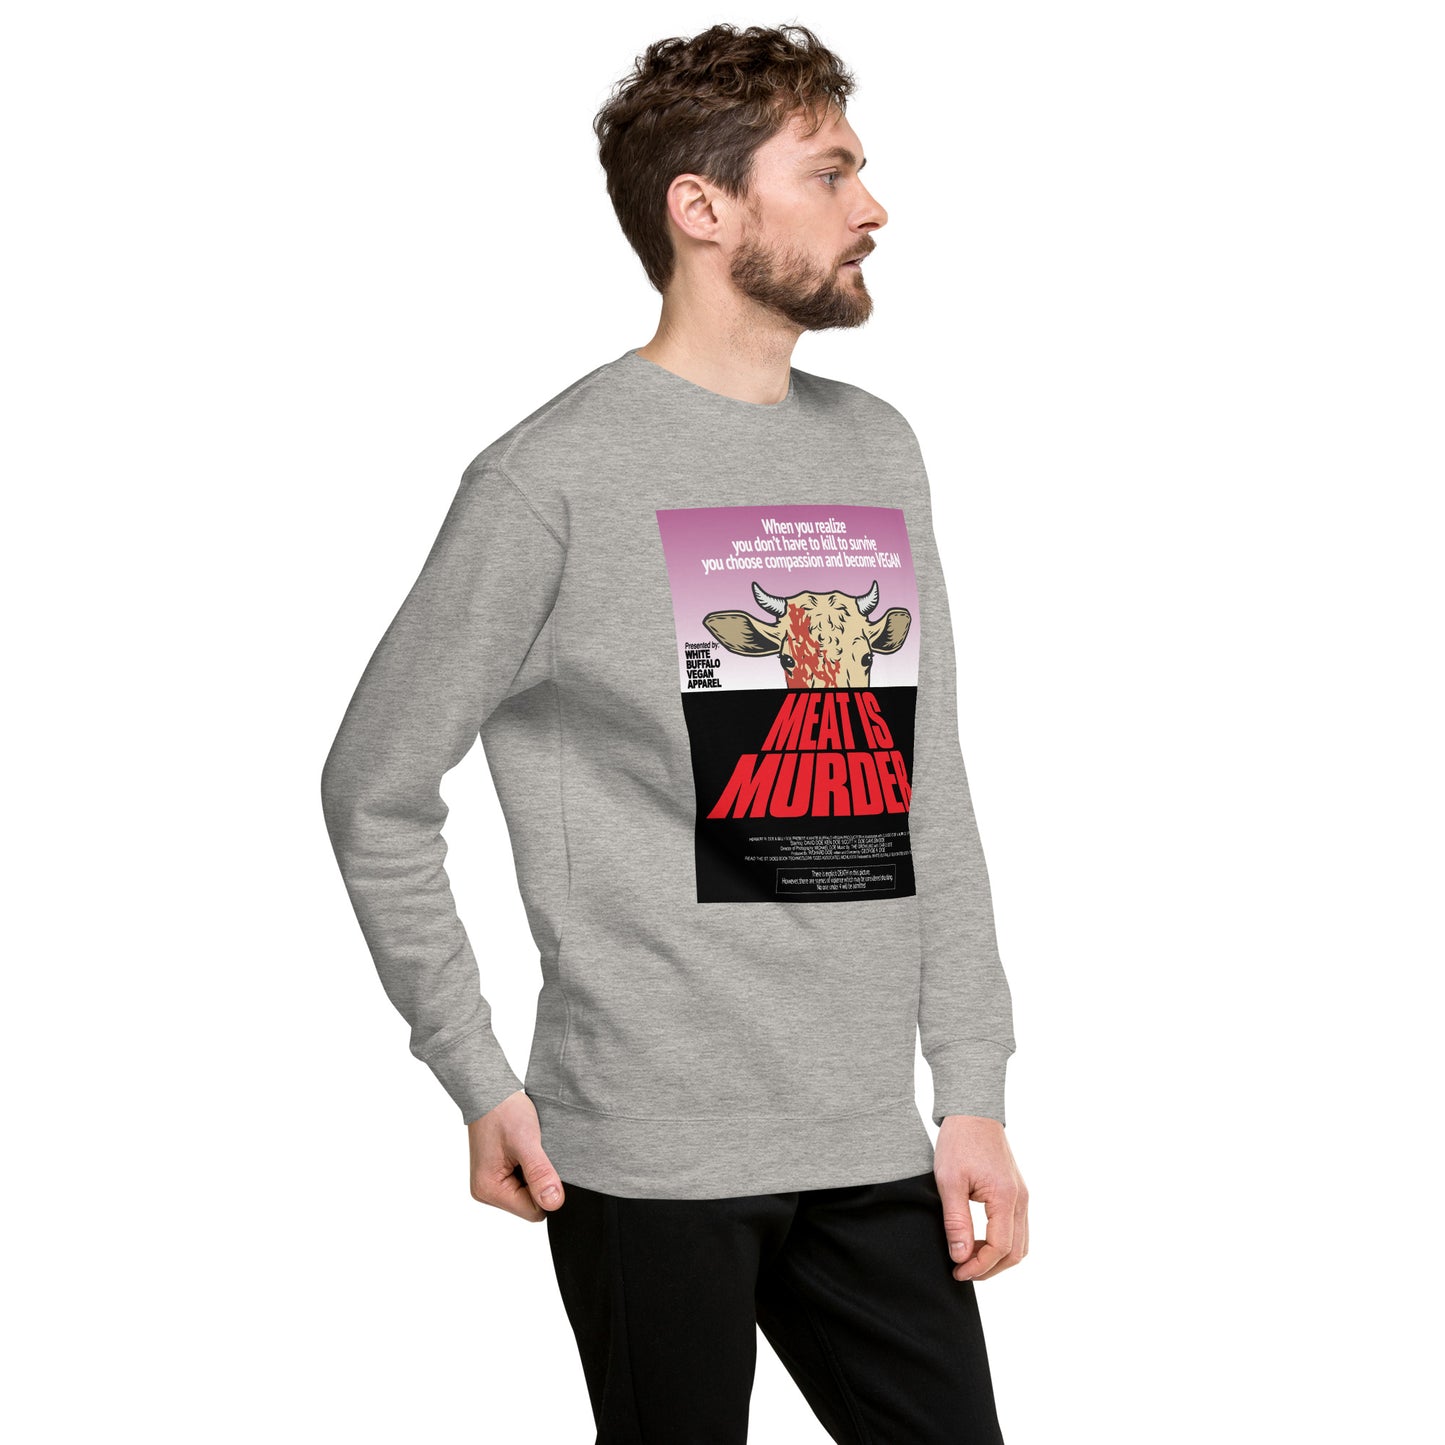 Sweater Grey Meat is Murder inspired by Dawn of the Dead poster created by White Buffalo Vegan Apparel